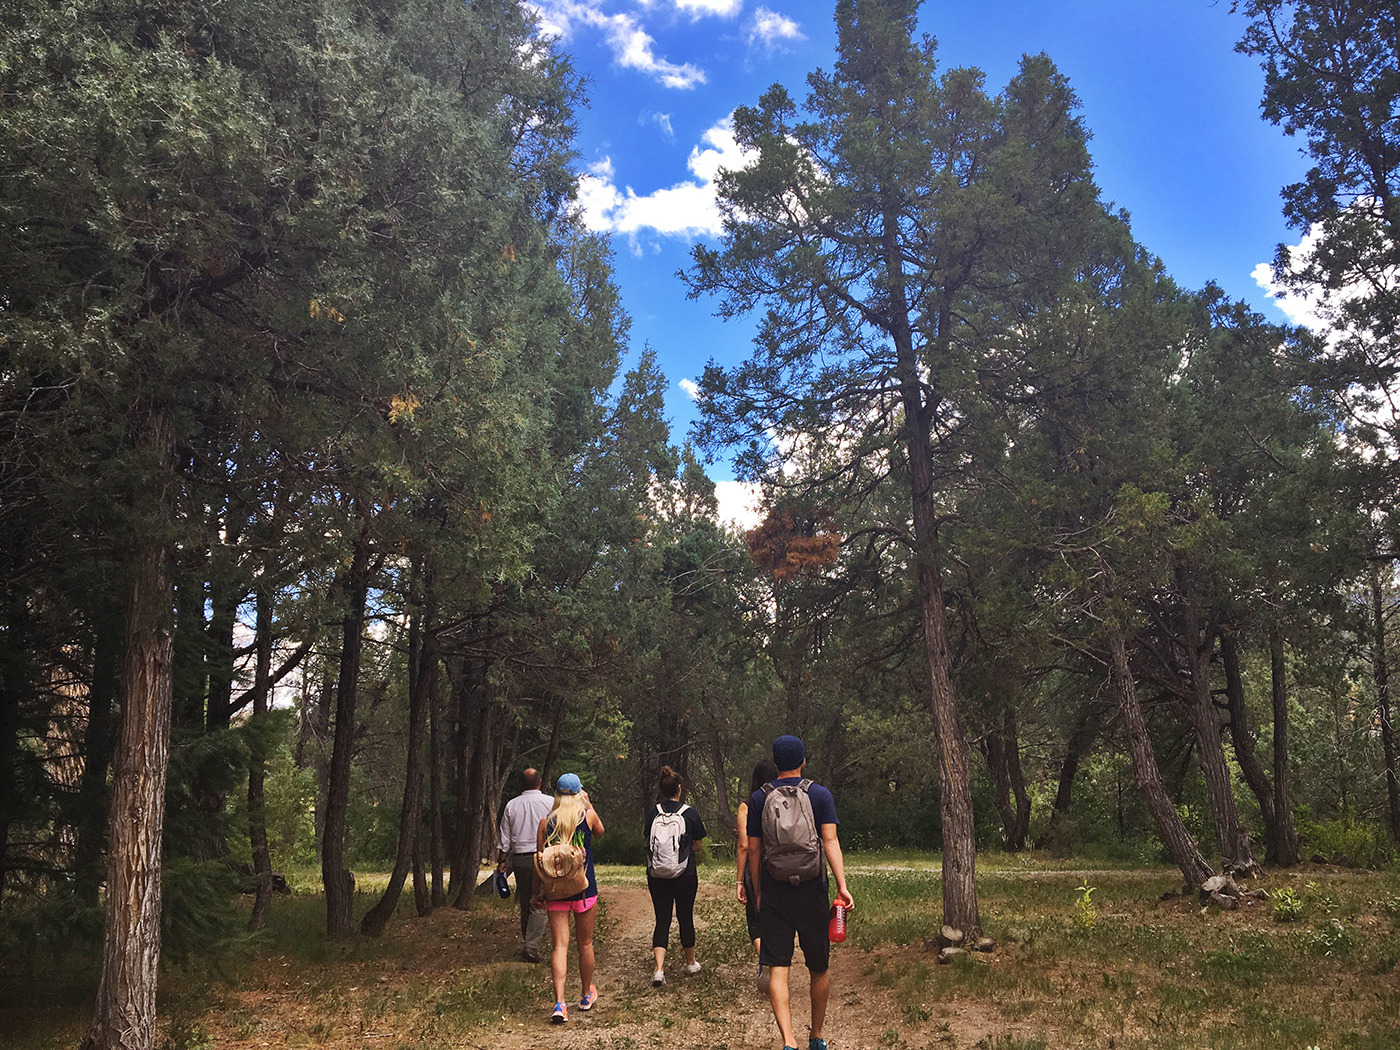 SMU-in-Taos students walk in a forest